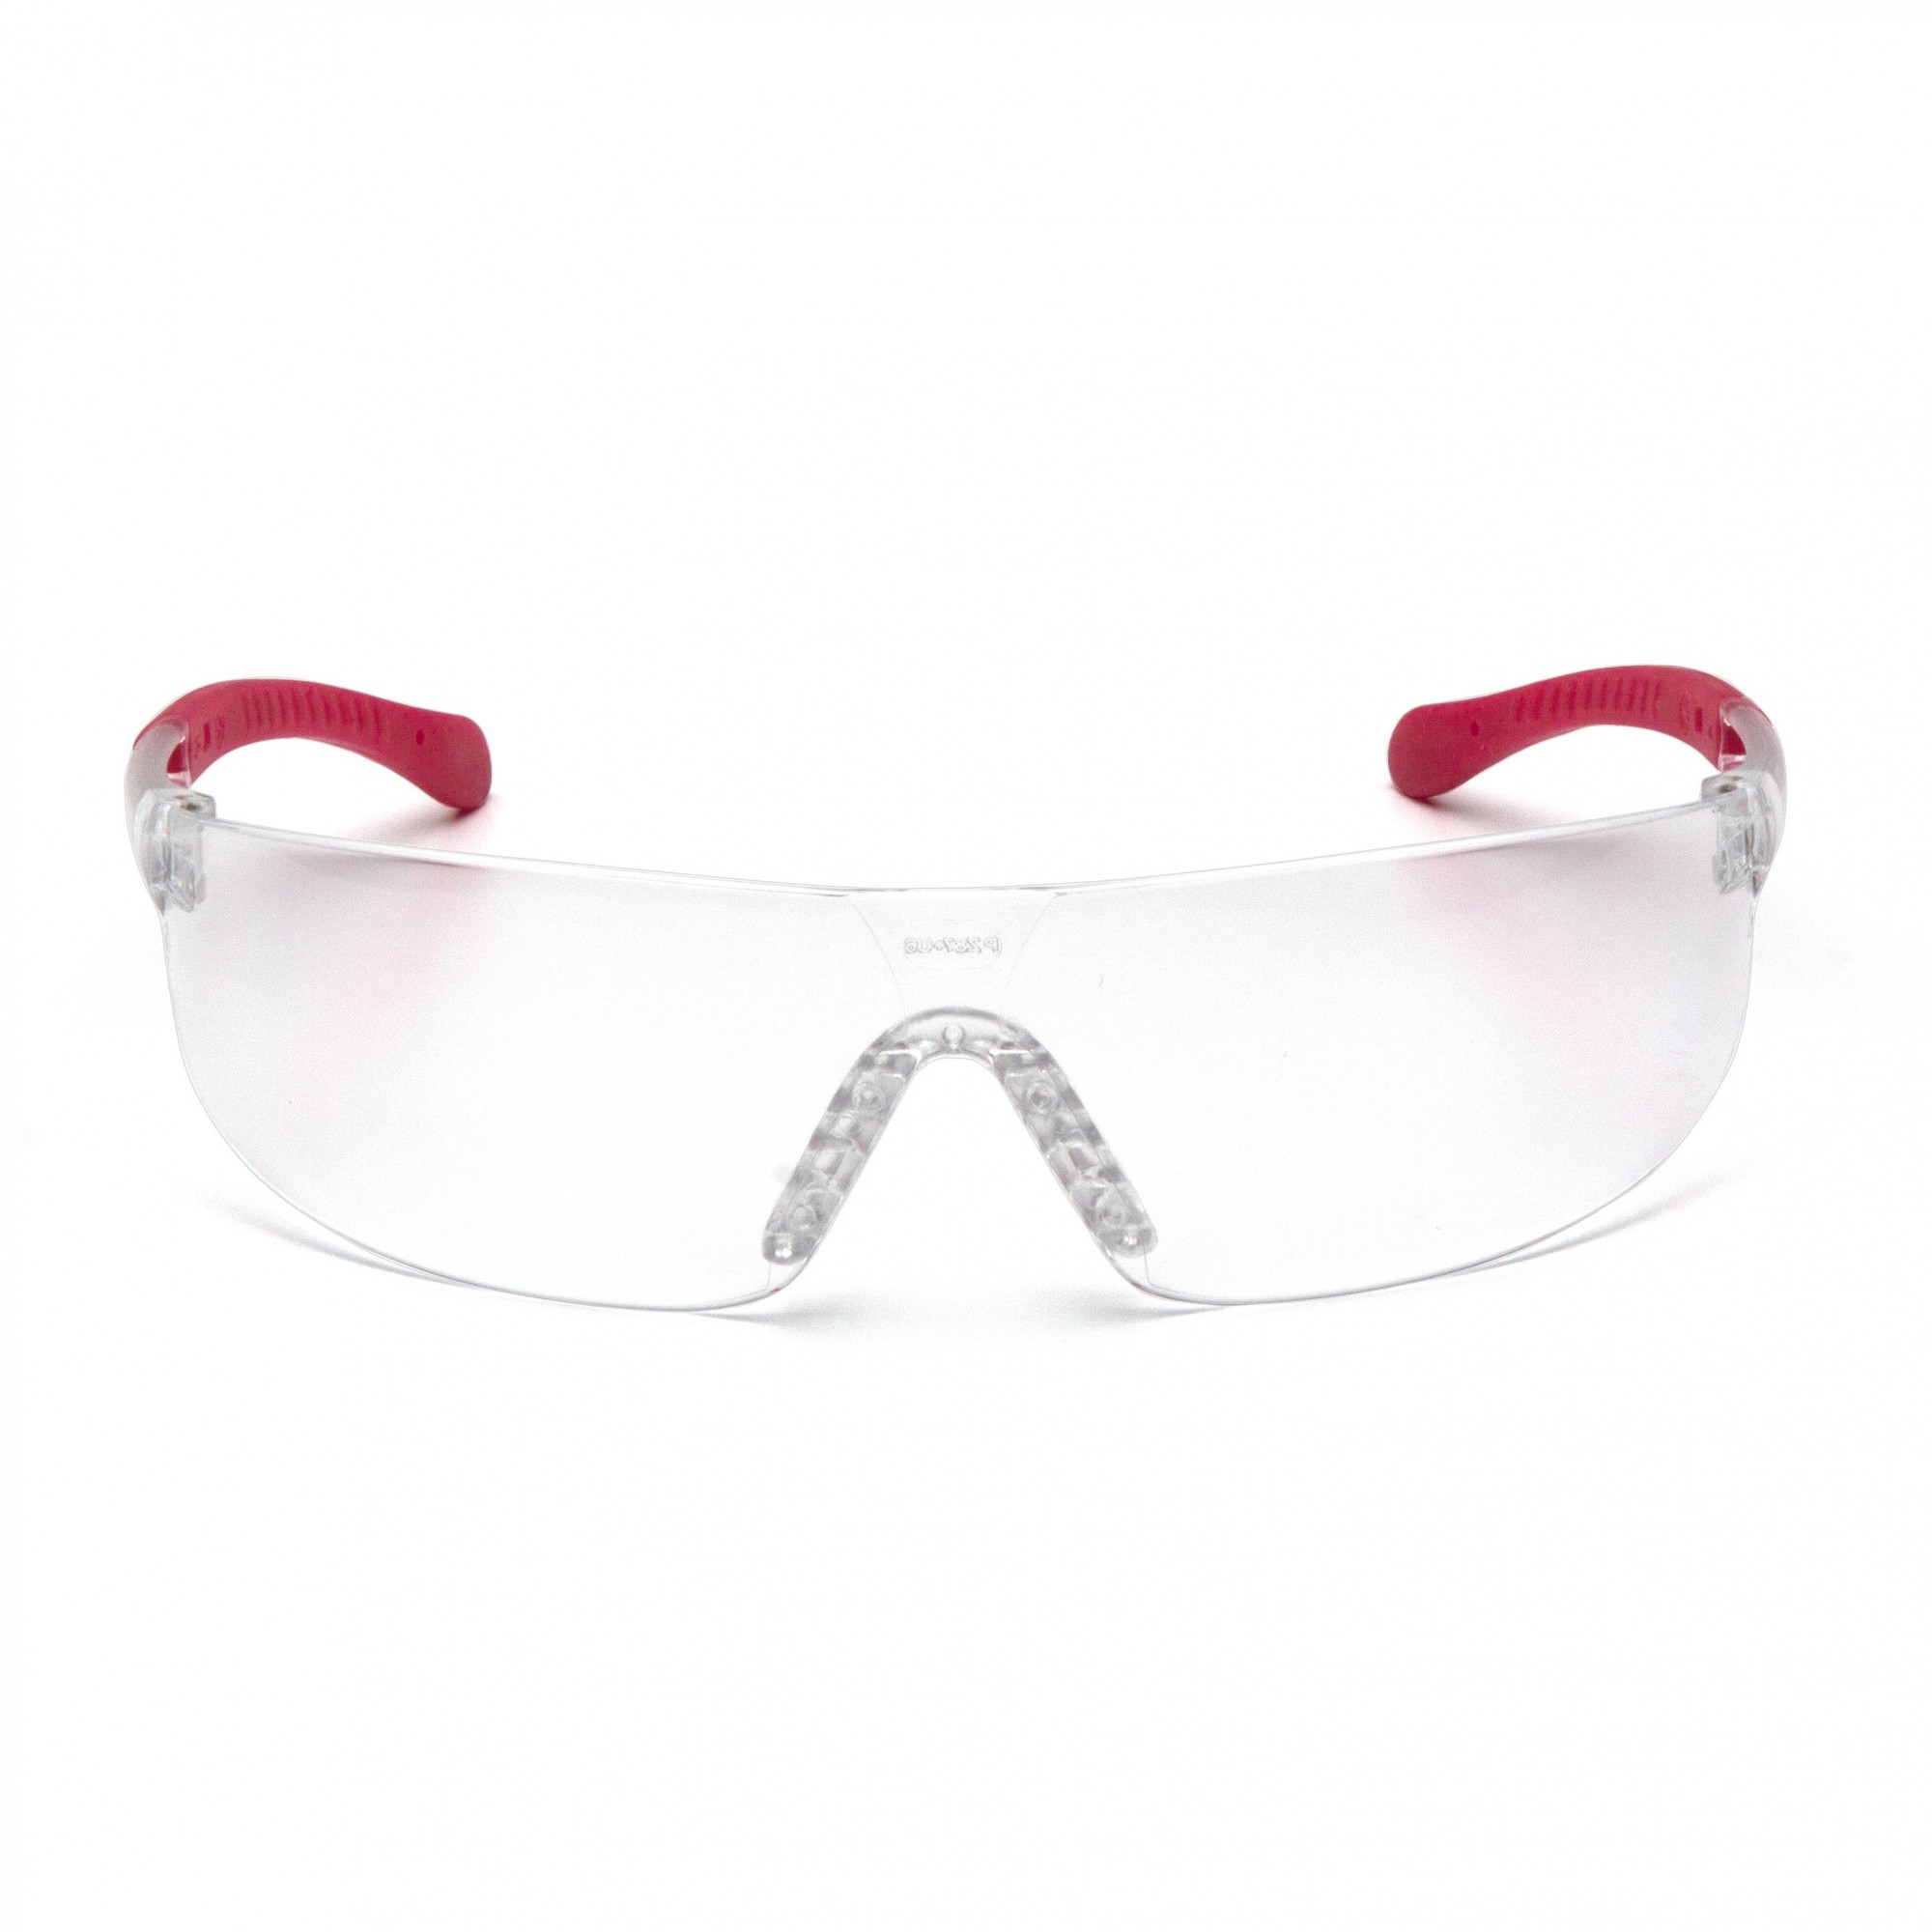 Pyramex Sp7210st Provoq Safety Glasses Pink Temples Clear Anti Fog Lens